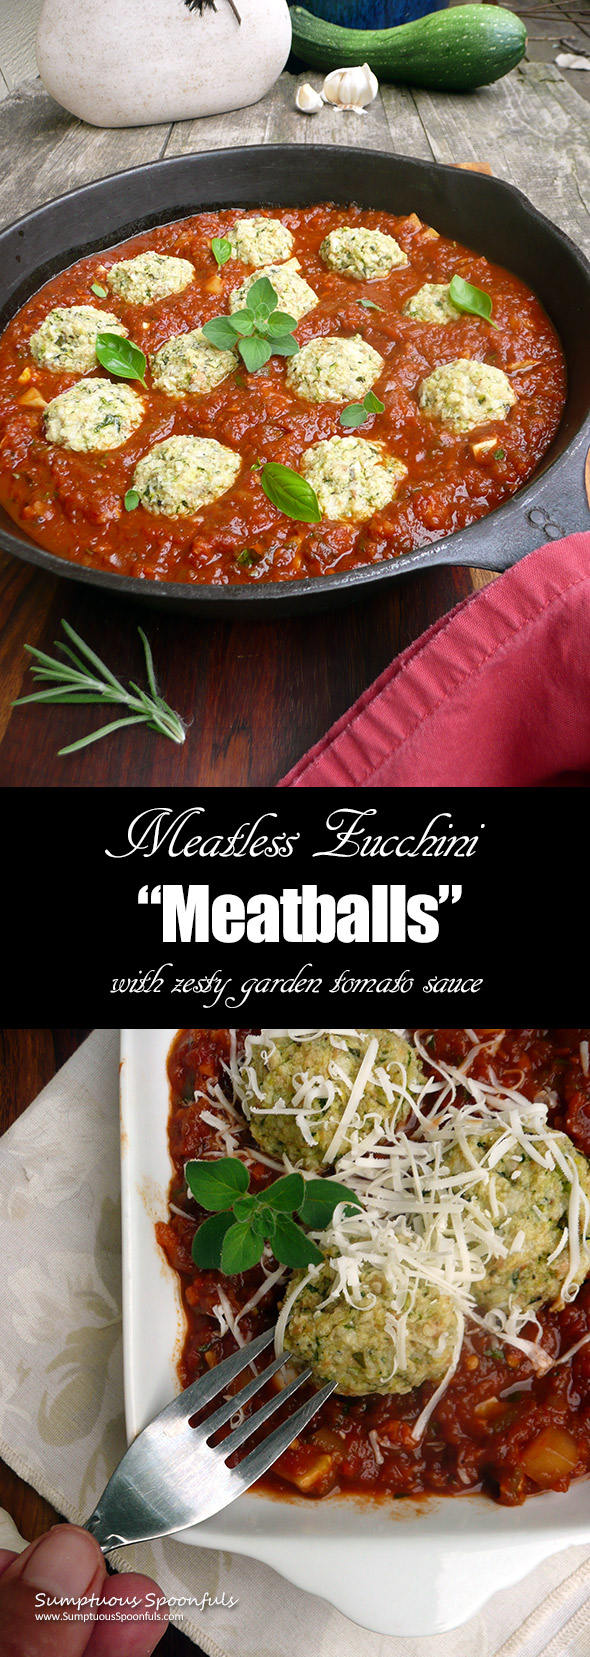 Meatless Zucchini "Meatballs" with Zesty Garden Tomato Sauce + 20 other zucchini recipes ~ Sumptuous Spoonfuls #vegetarian #meatballs #recipe